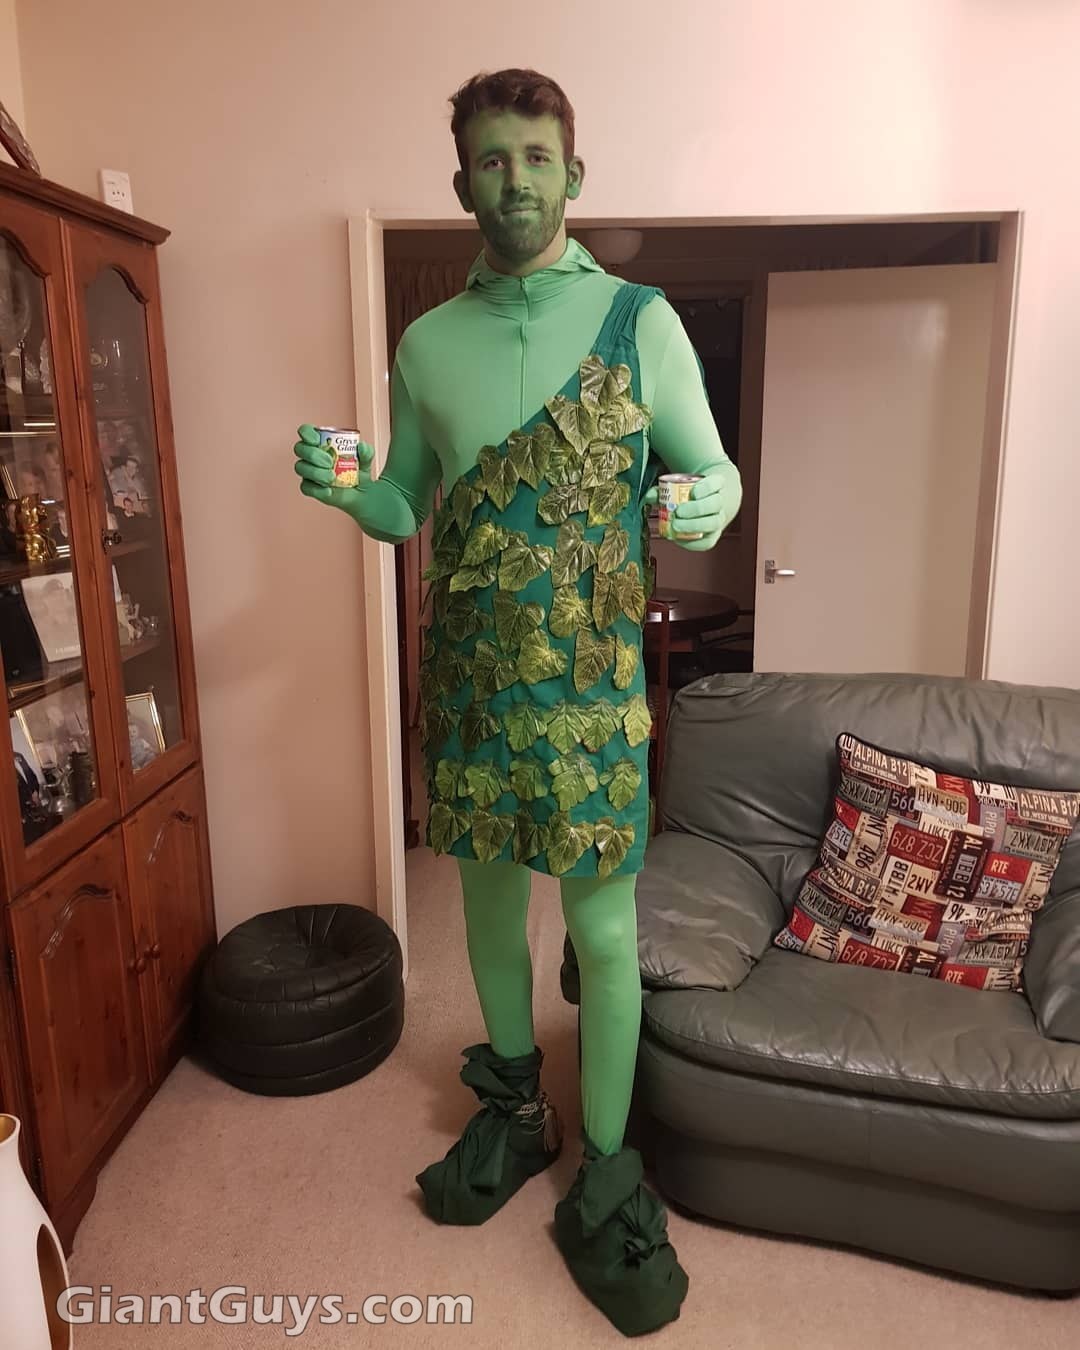 Tall Guy Costume - Green Giant